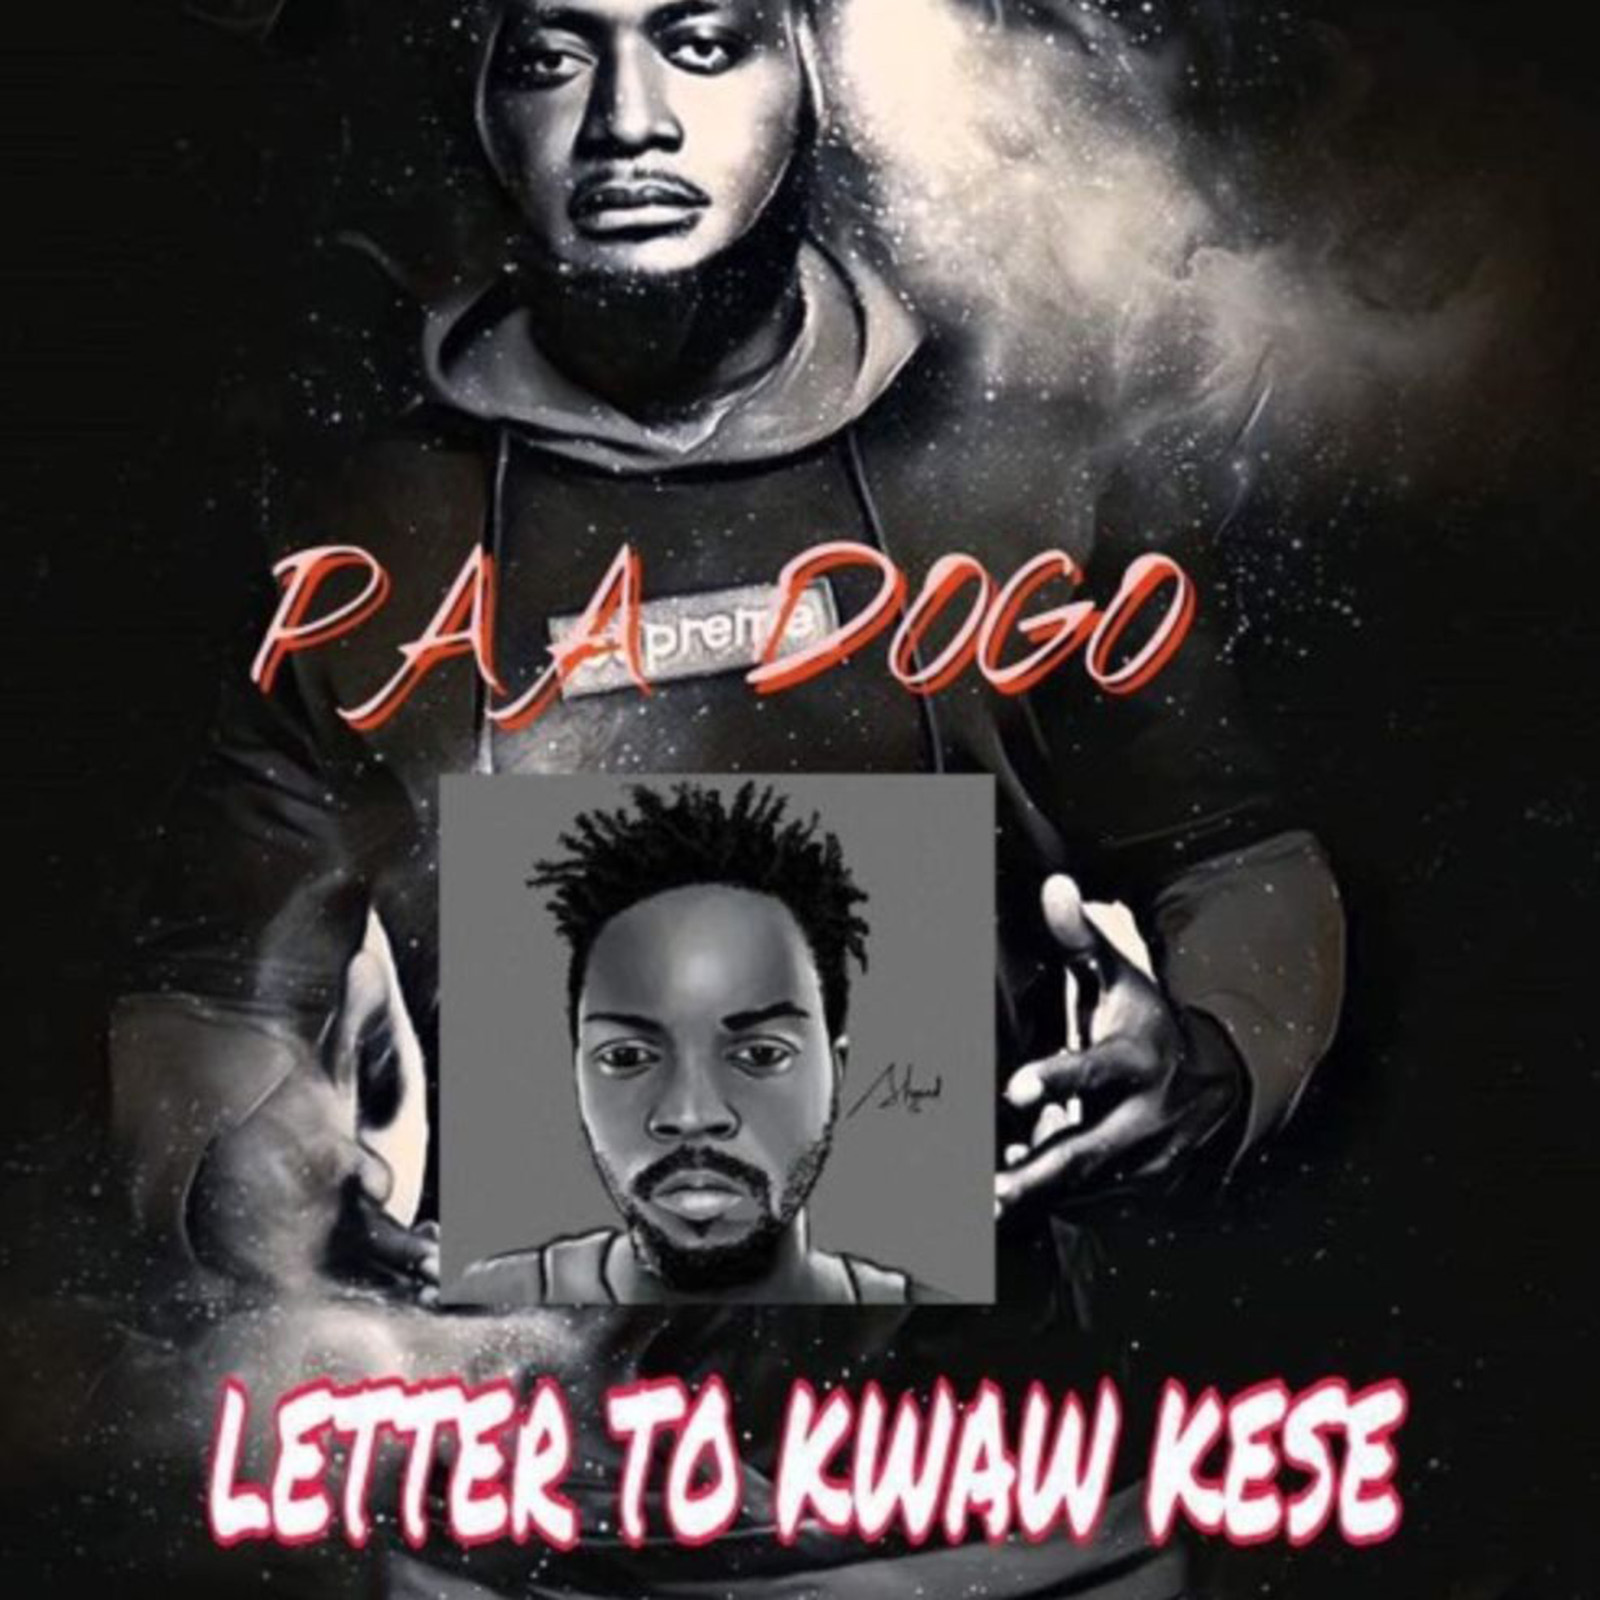 Letter To Kwaw Kese (Page 1) by Paa Dogo